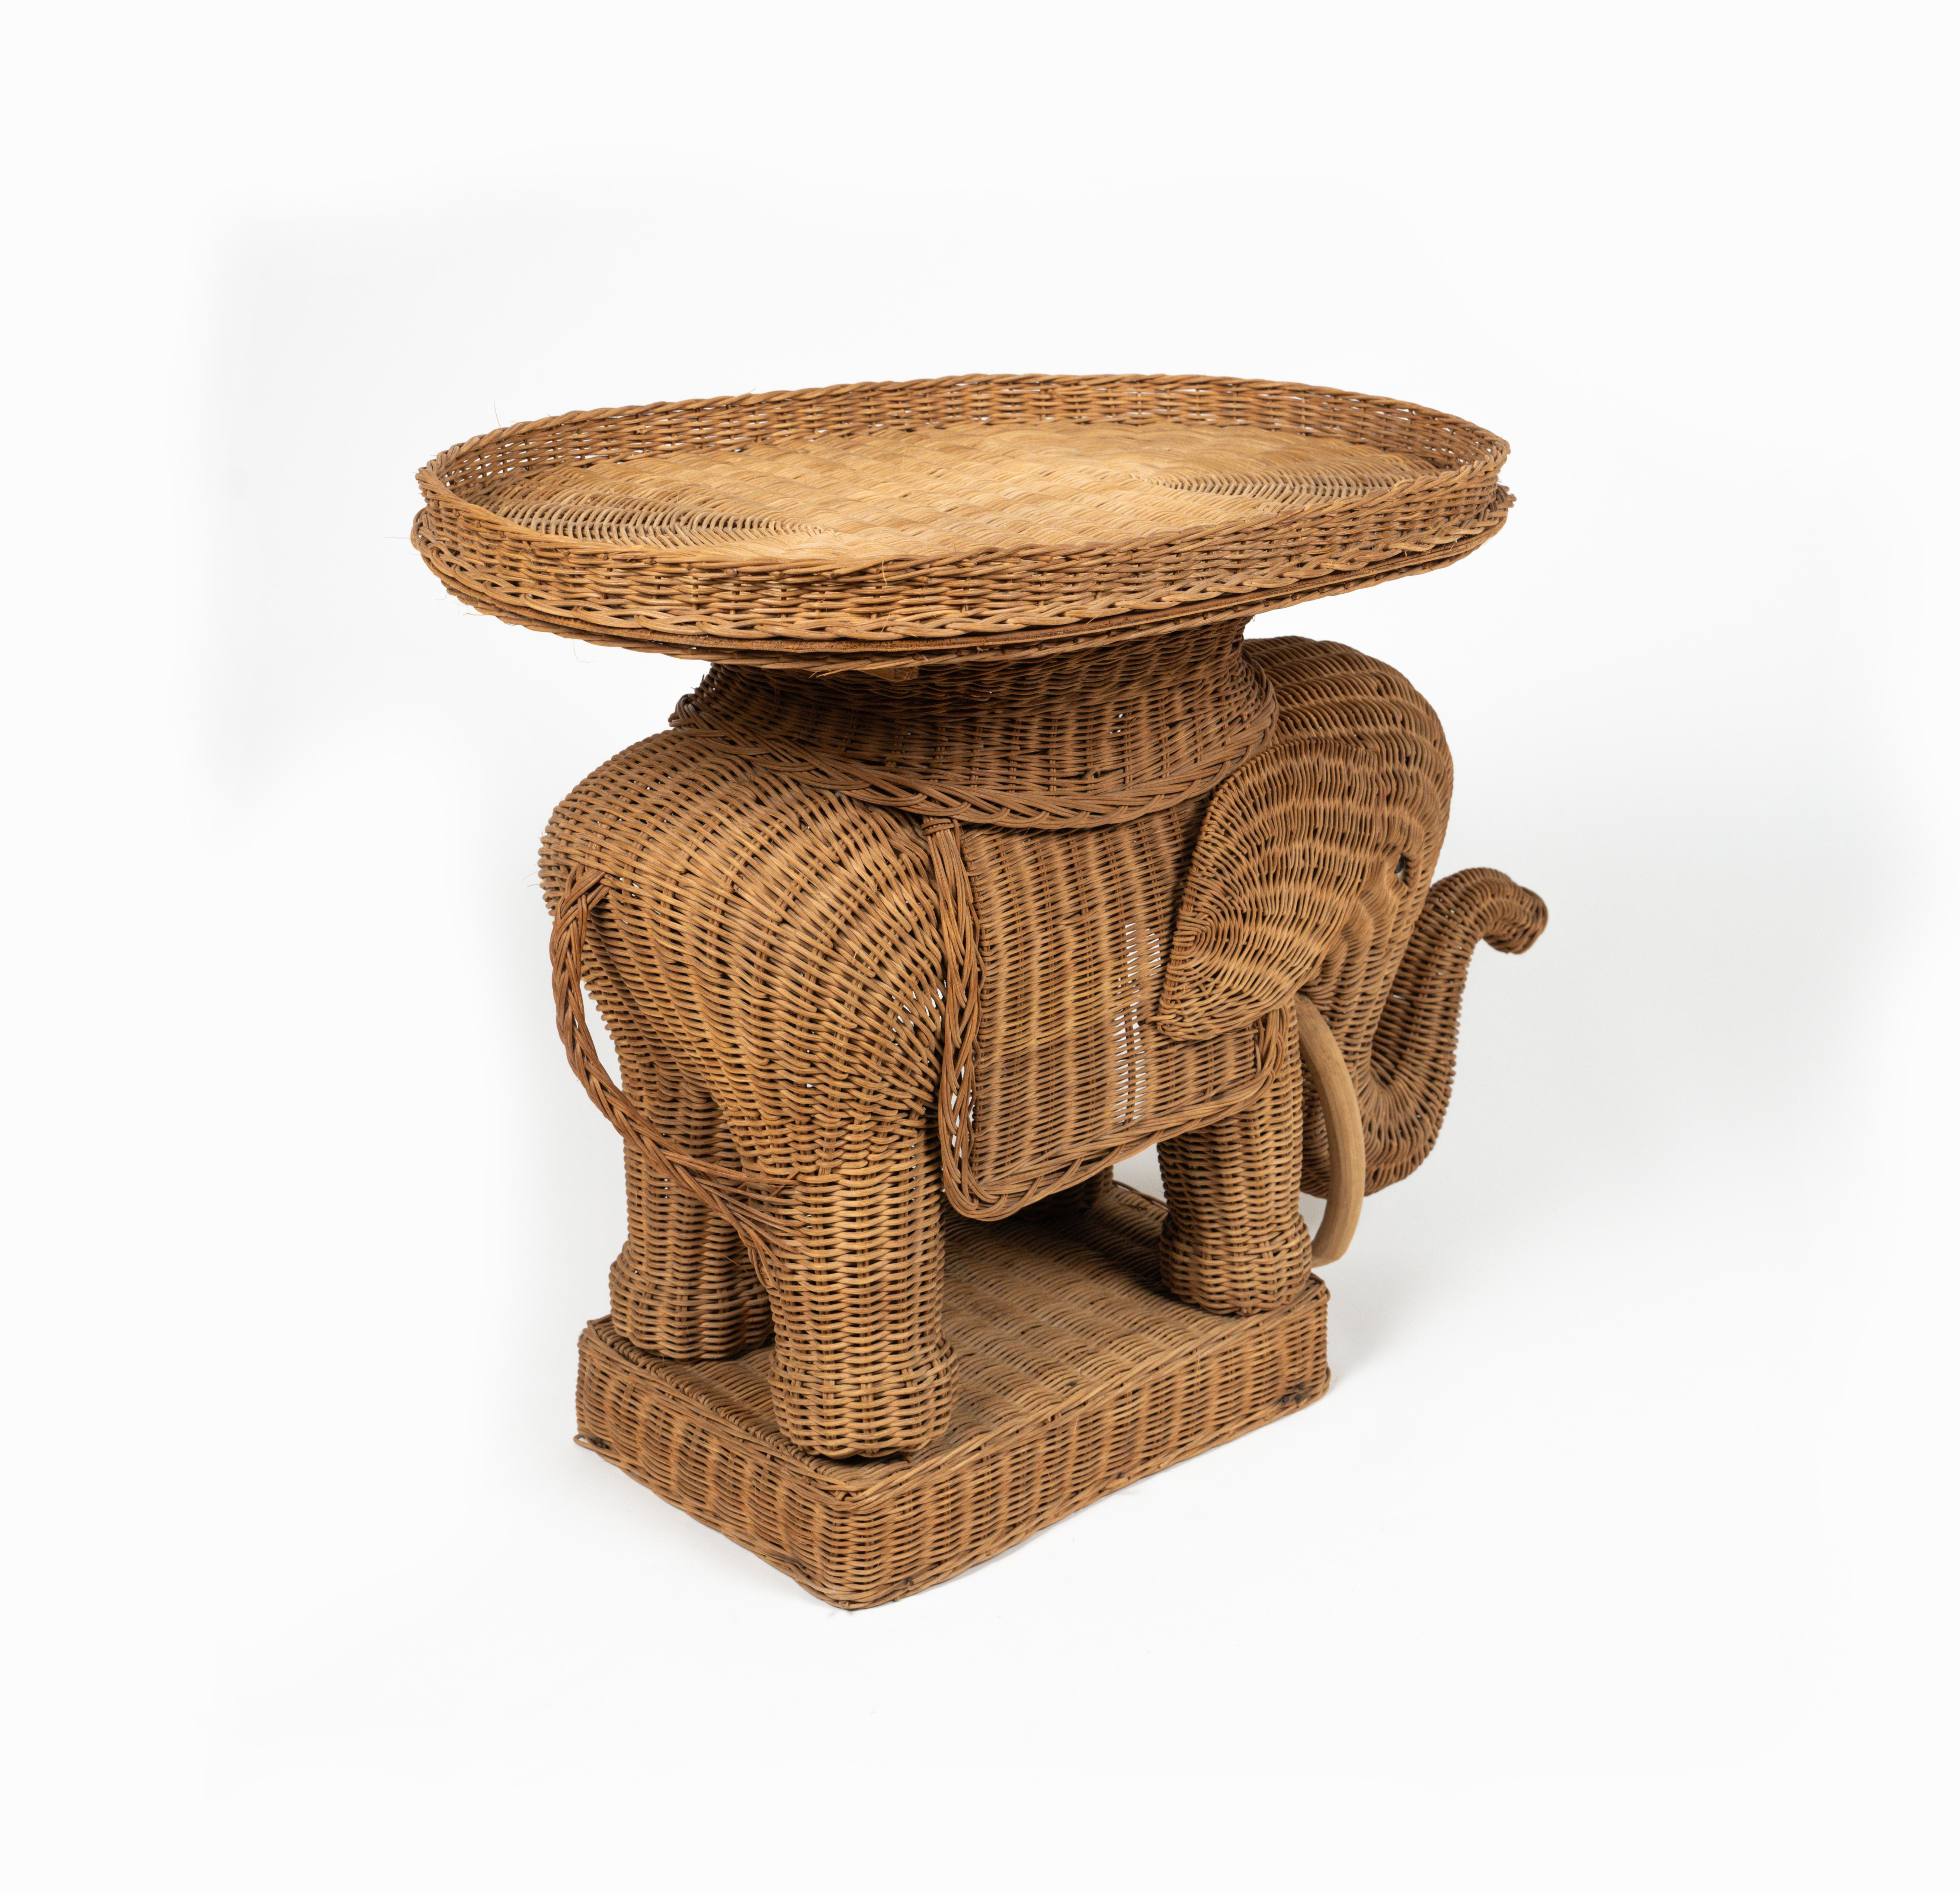 Rattan & Wicker Elephant Side Coffee Table Vivai Del Sud Style, Italy, 1960s For Sale 8